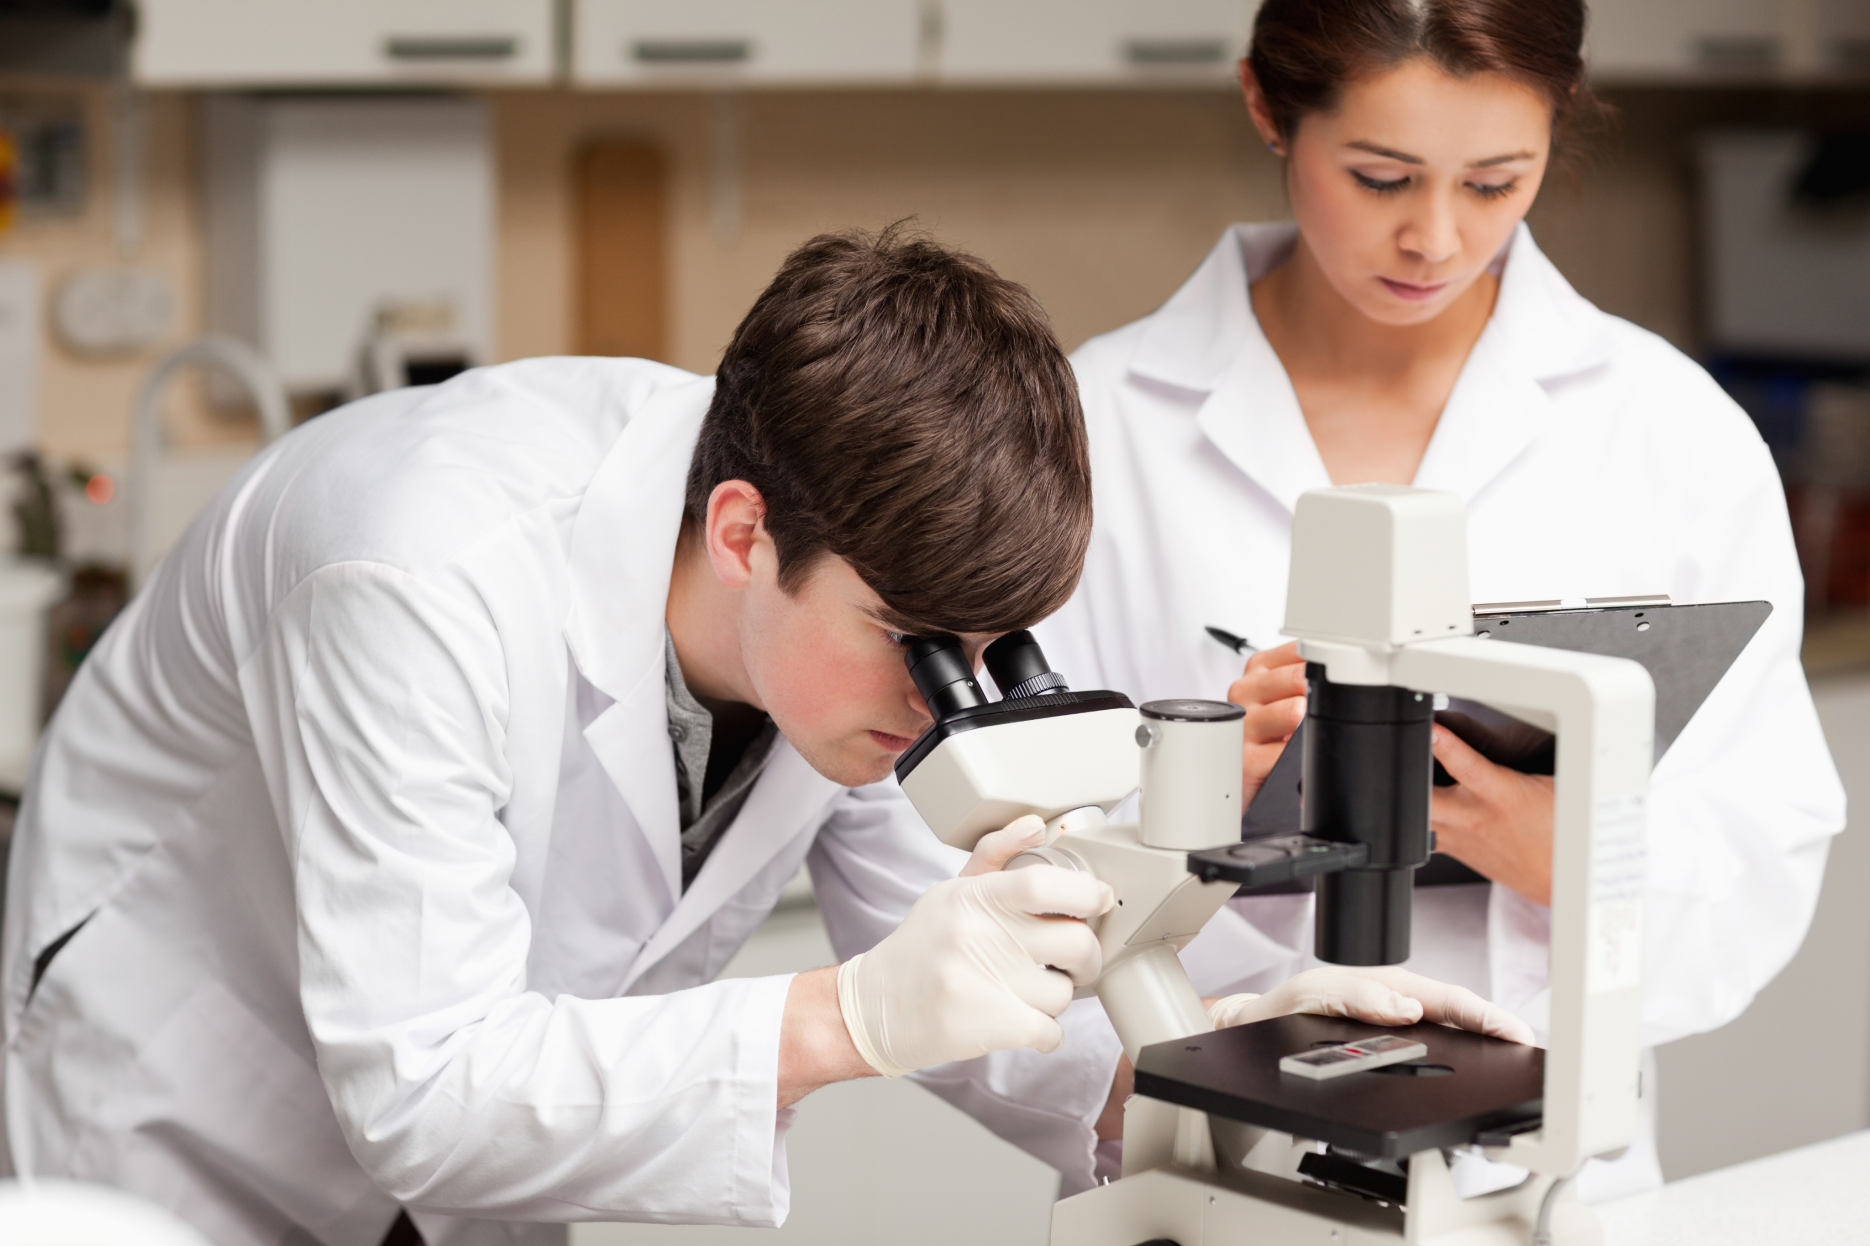 Male scientist looking in a microscope while his female colleague is taking notes.